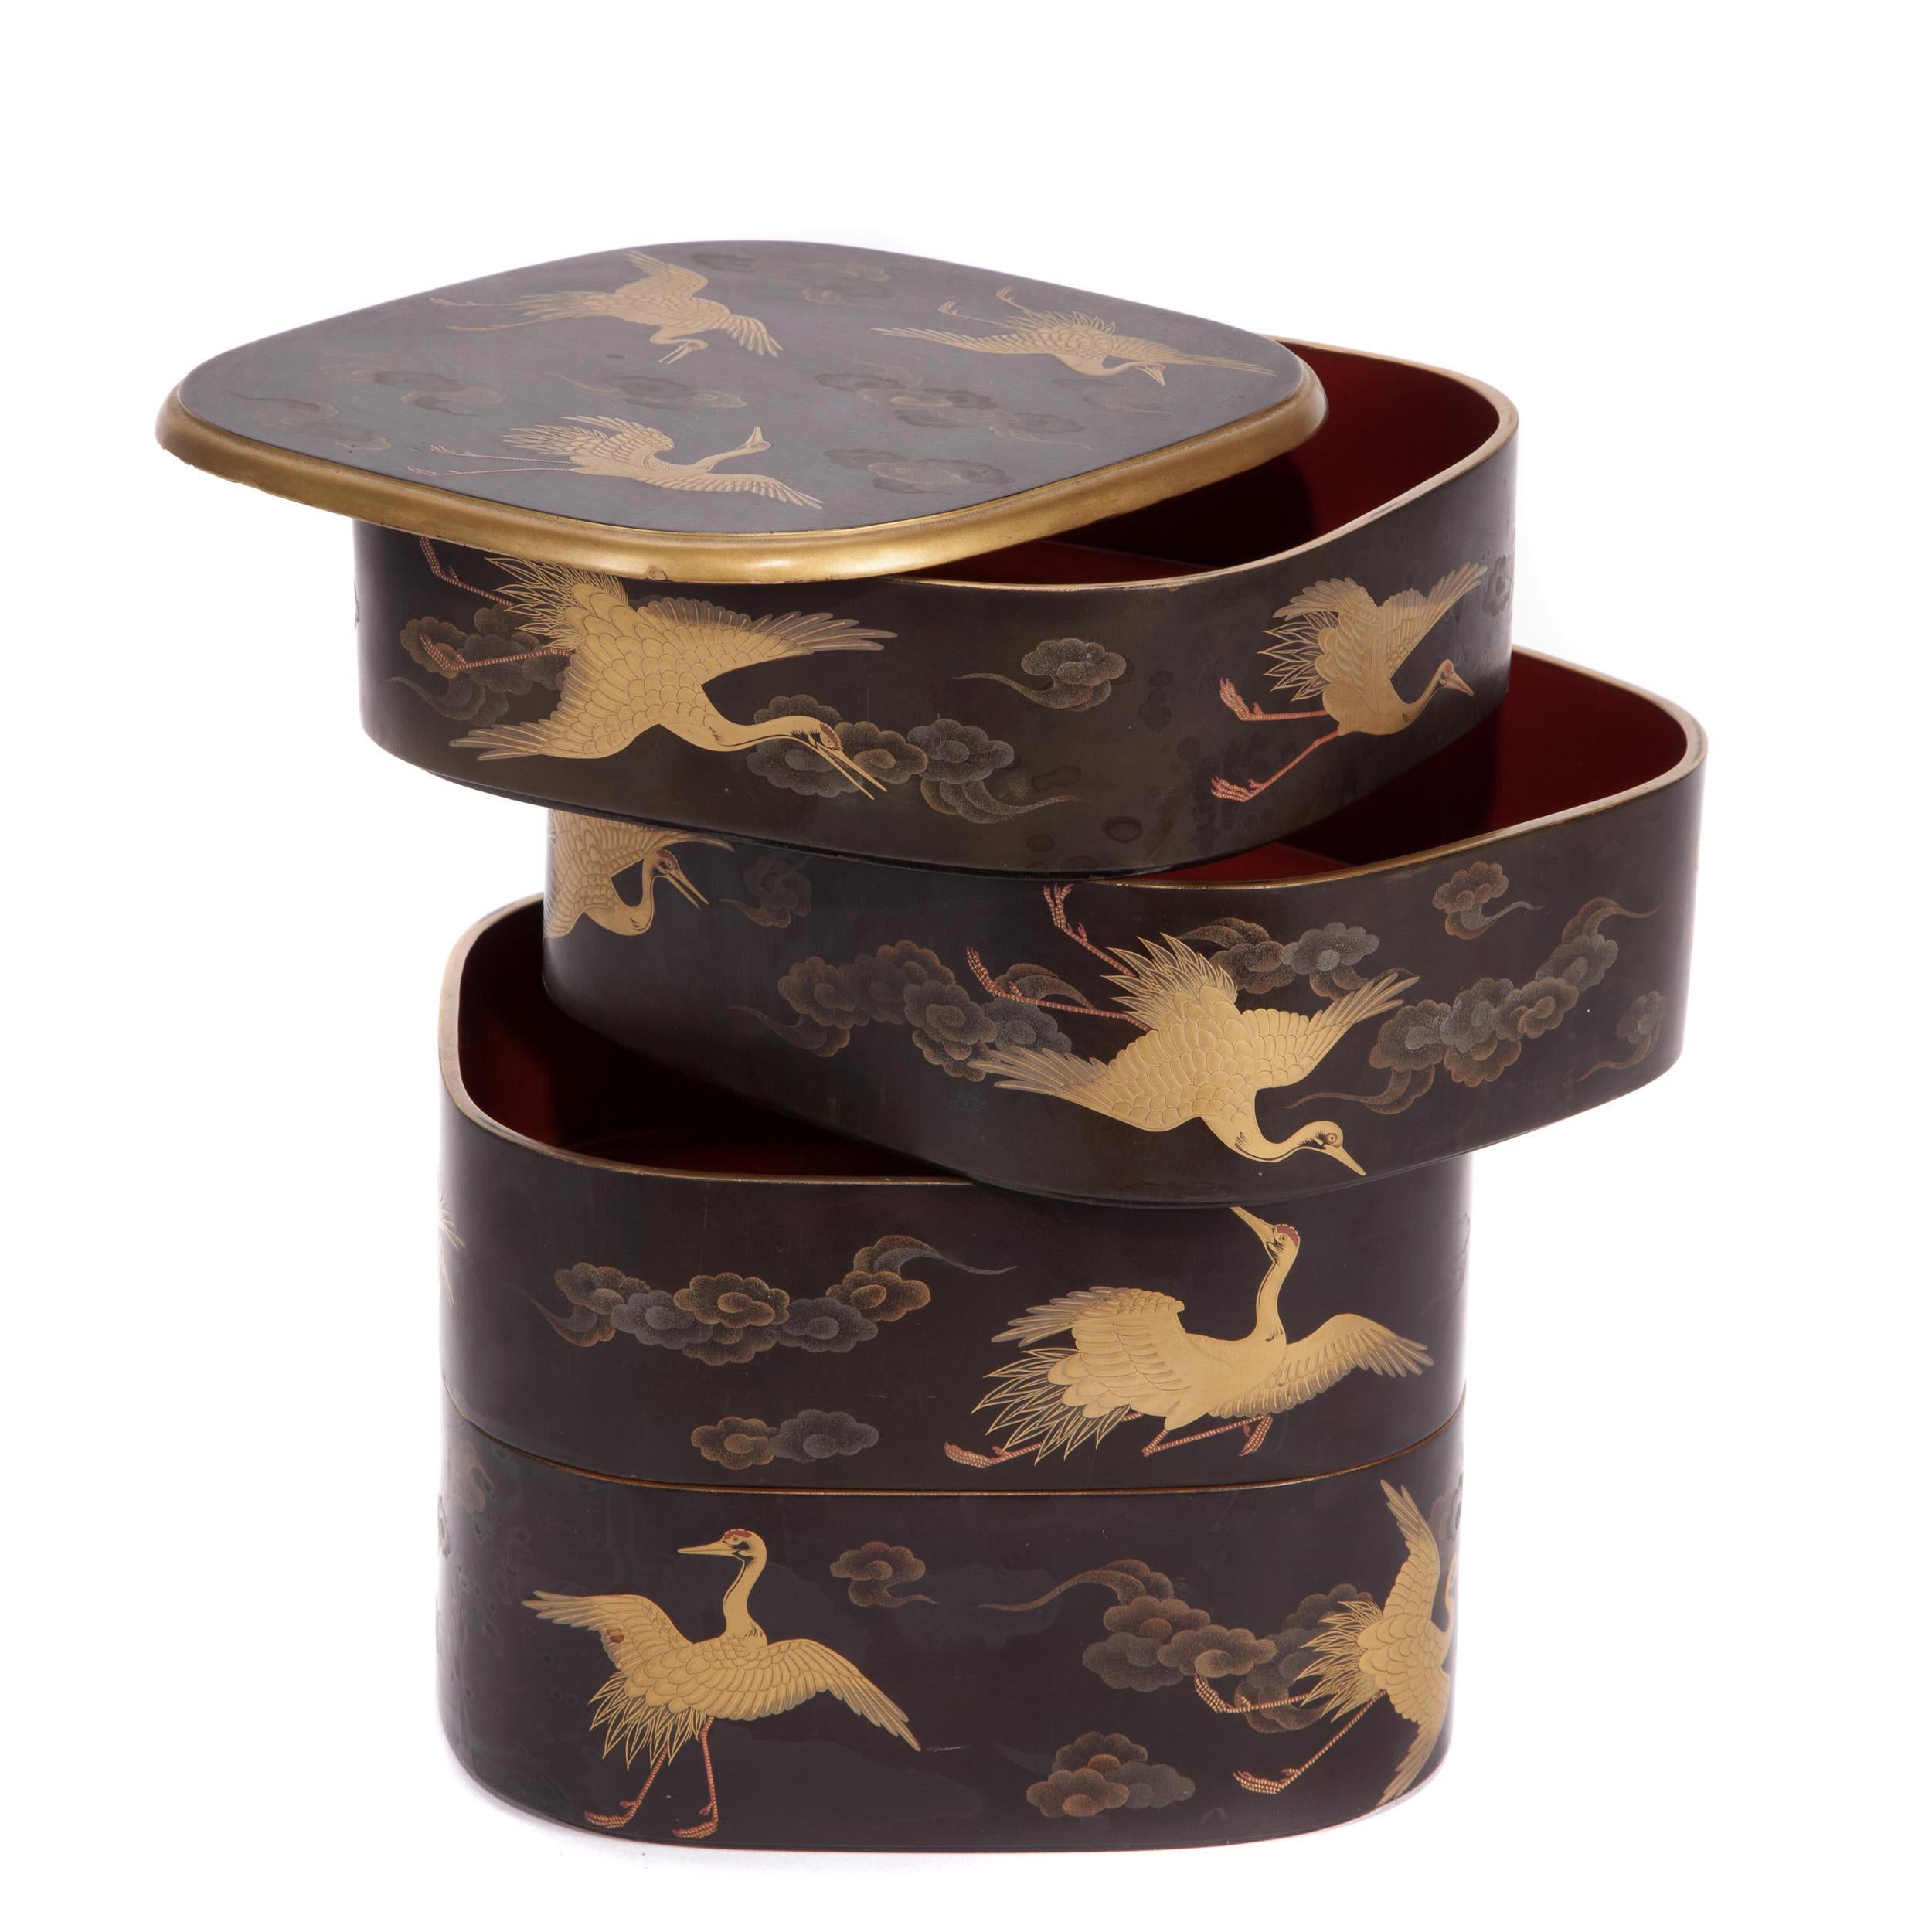 Japonisme Japanese Lacquered Jubako Box with Crane Design